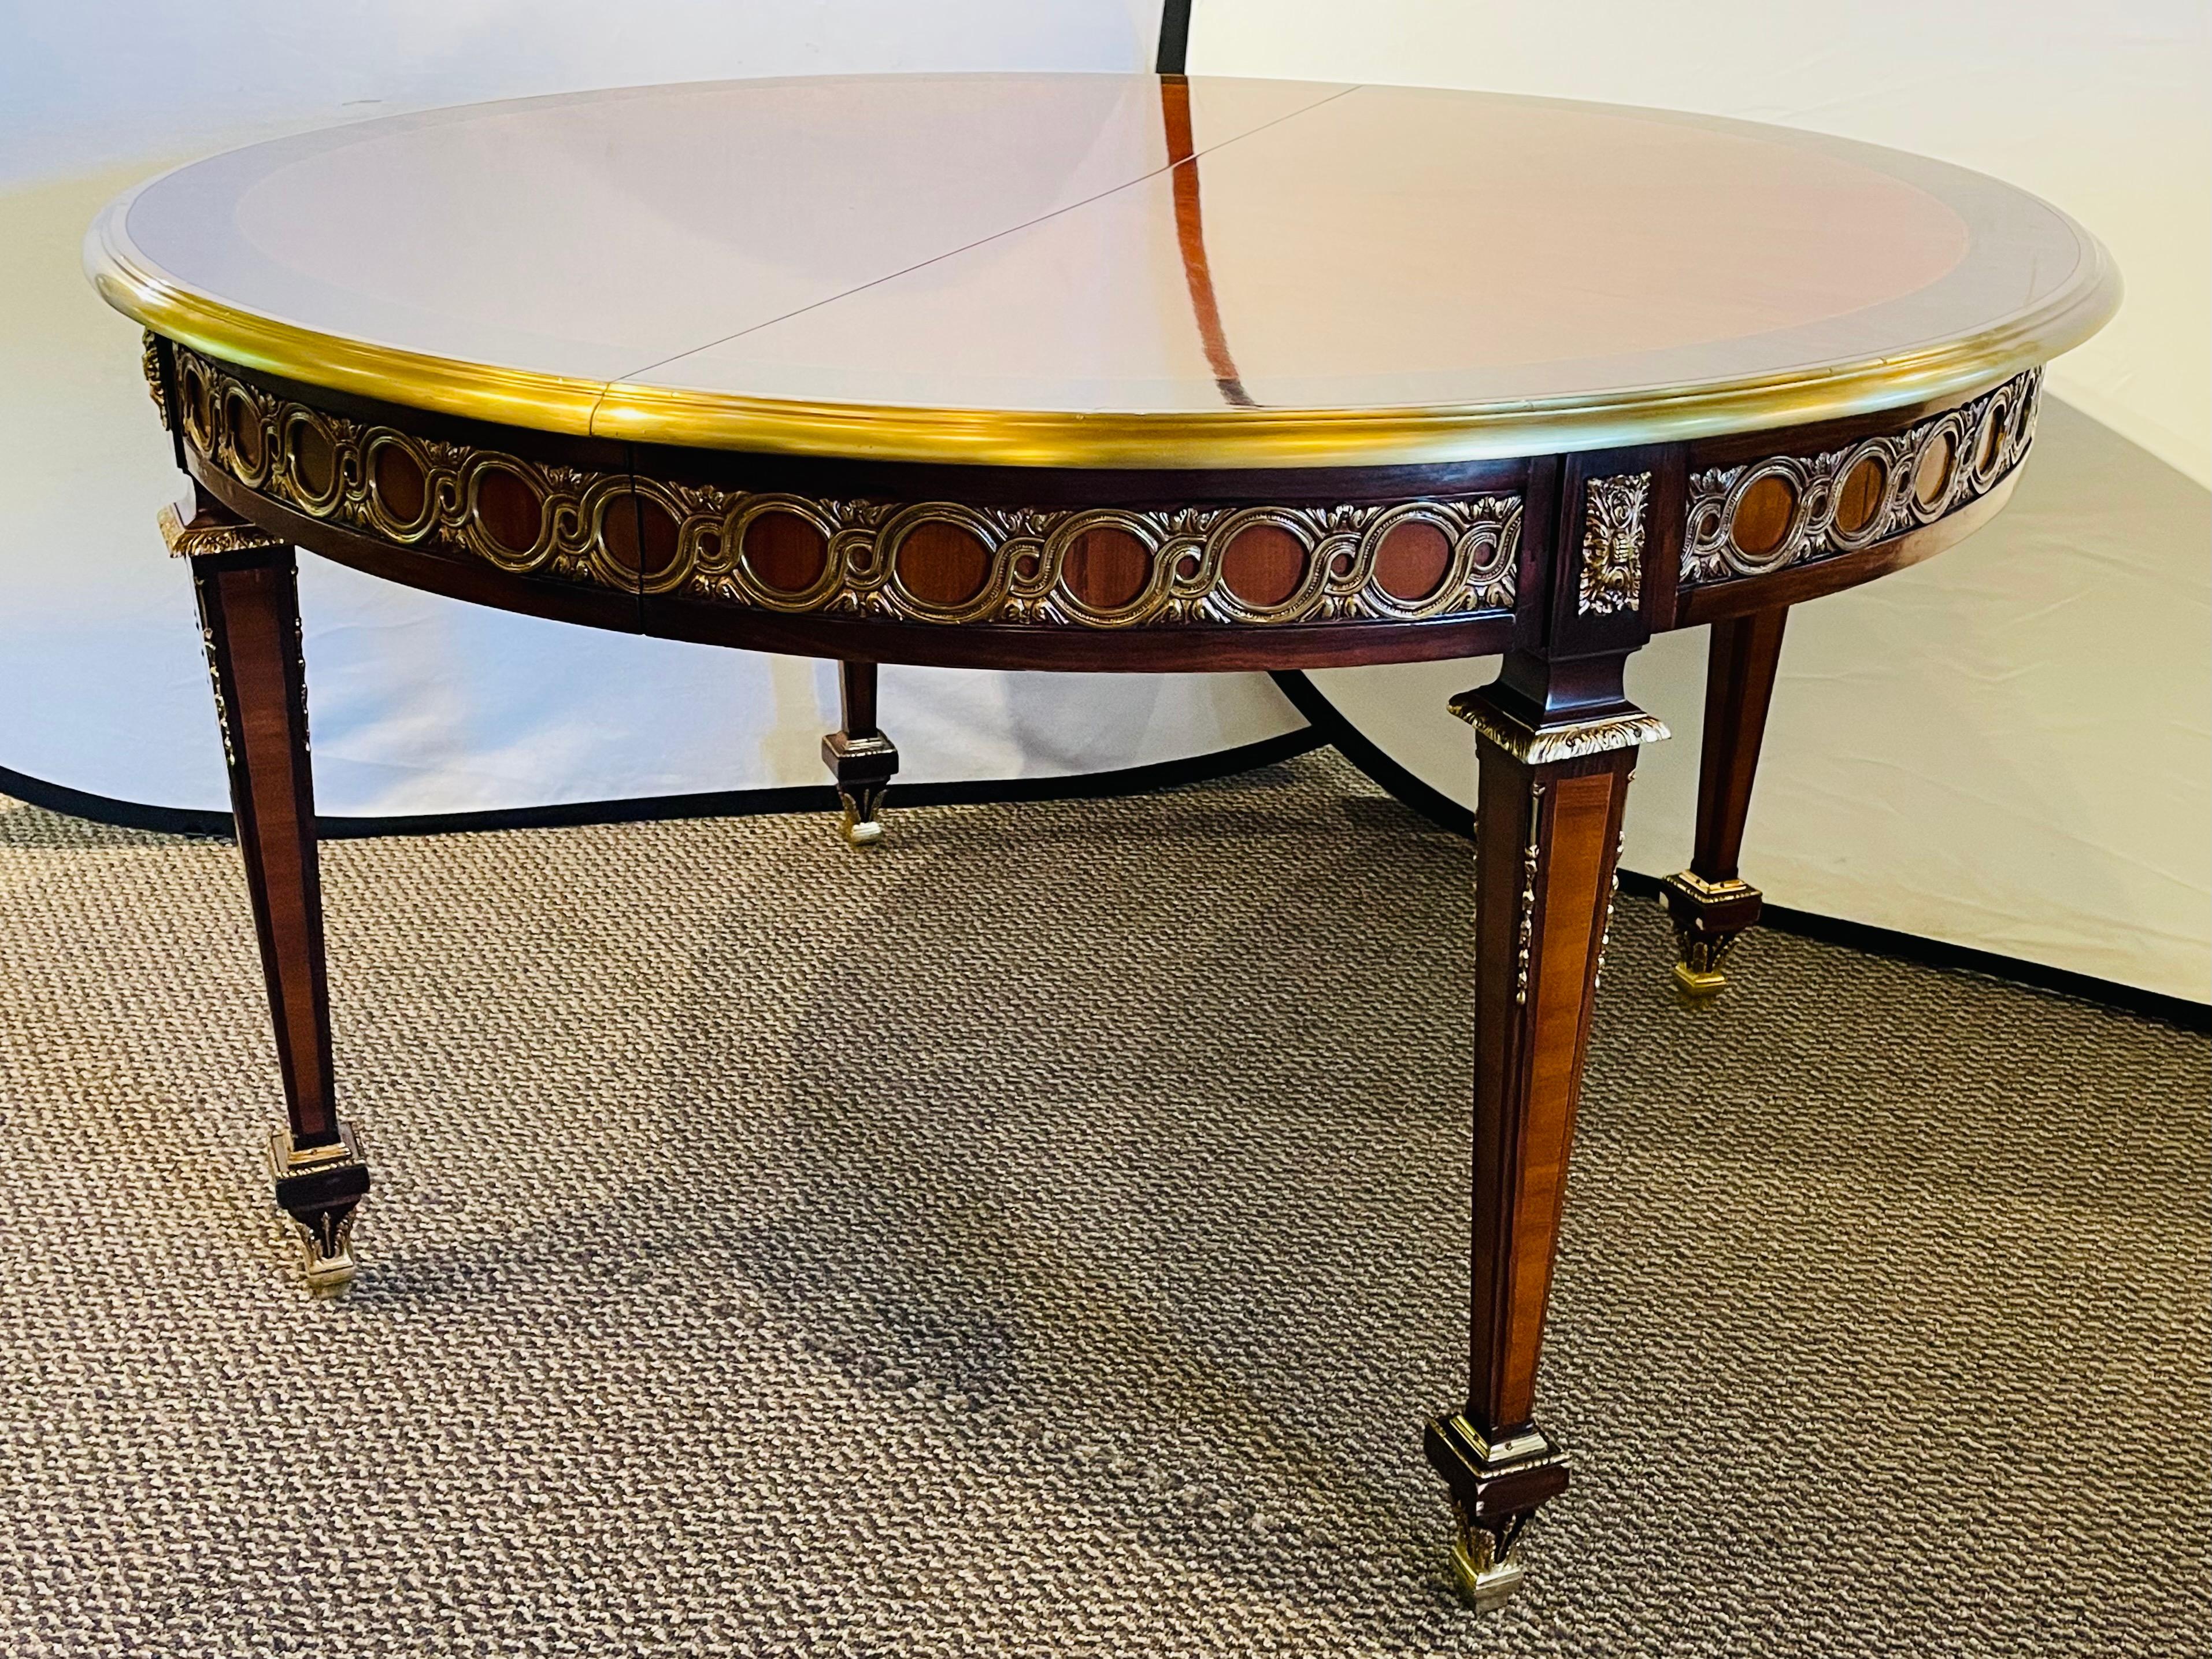 Mid-20th Century French Louis XVi Style Circular Oval Dining-room Table with Three Leaves